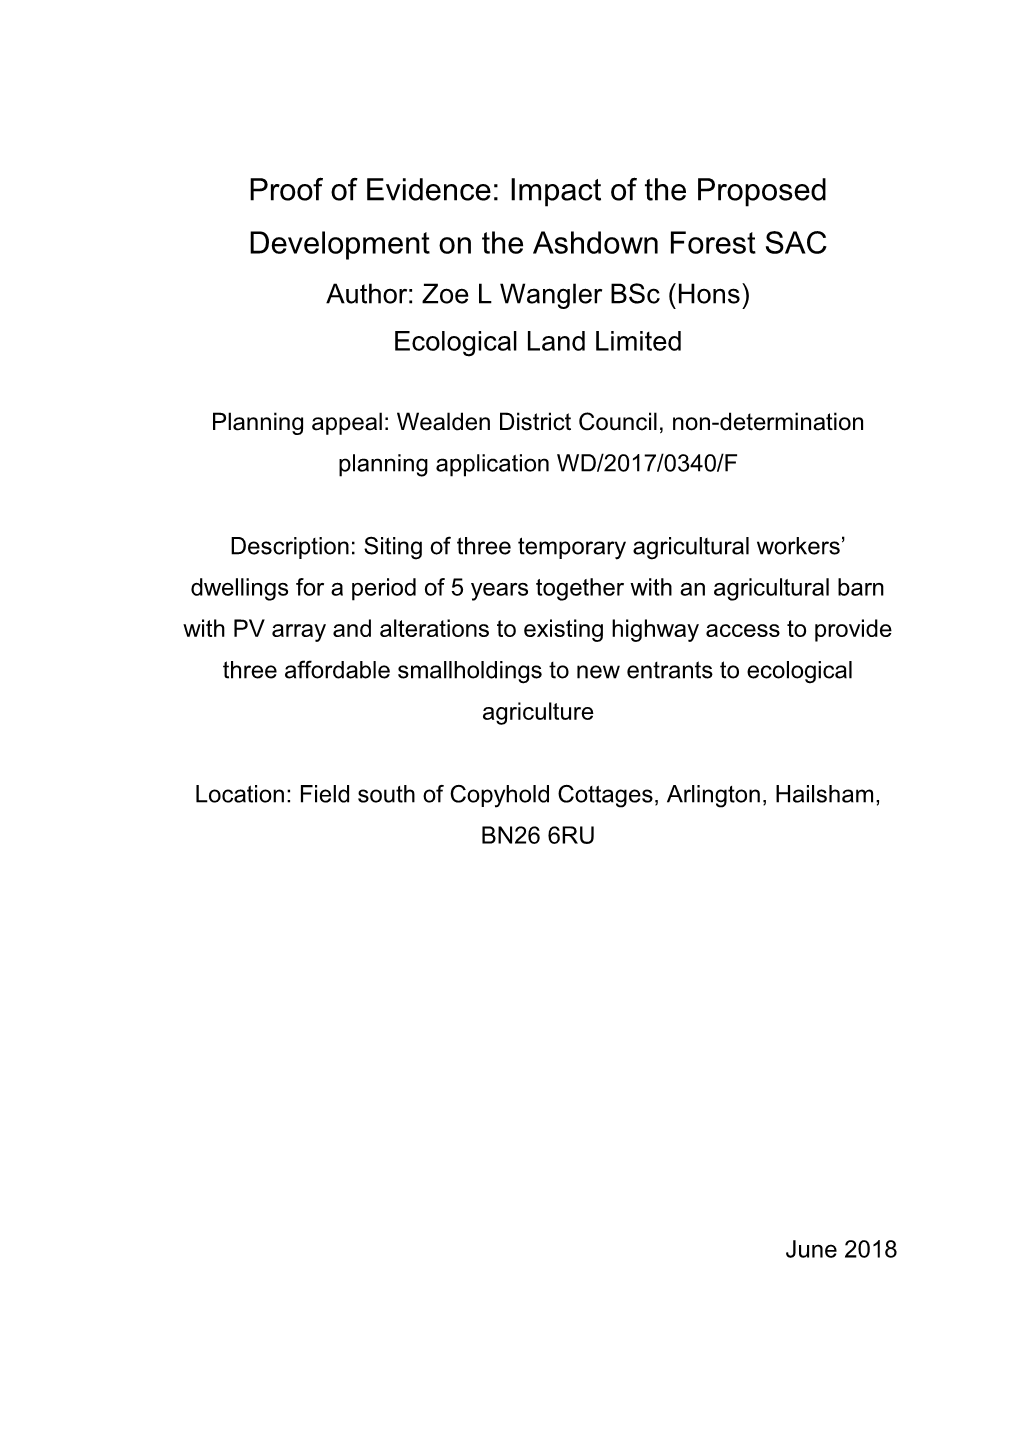 Impact of the Proposed Development on the Ashdown Forest SAC Author: Zoe L Wangler Bsc (Hons) Ecological Land Limited